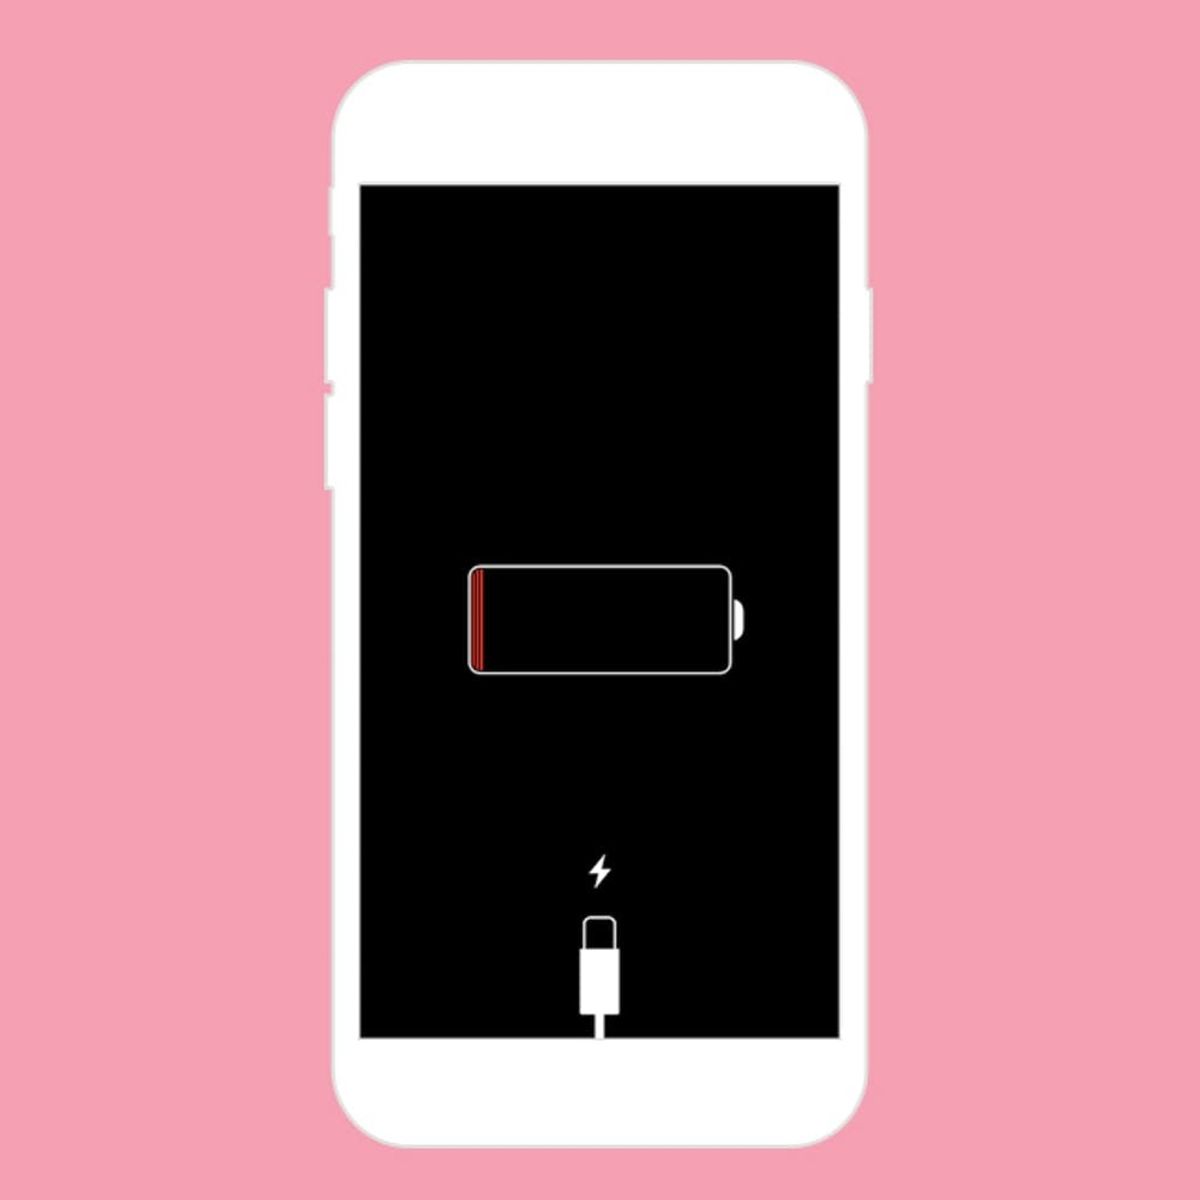 How to Stop Your Phone from Dying Suddenly